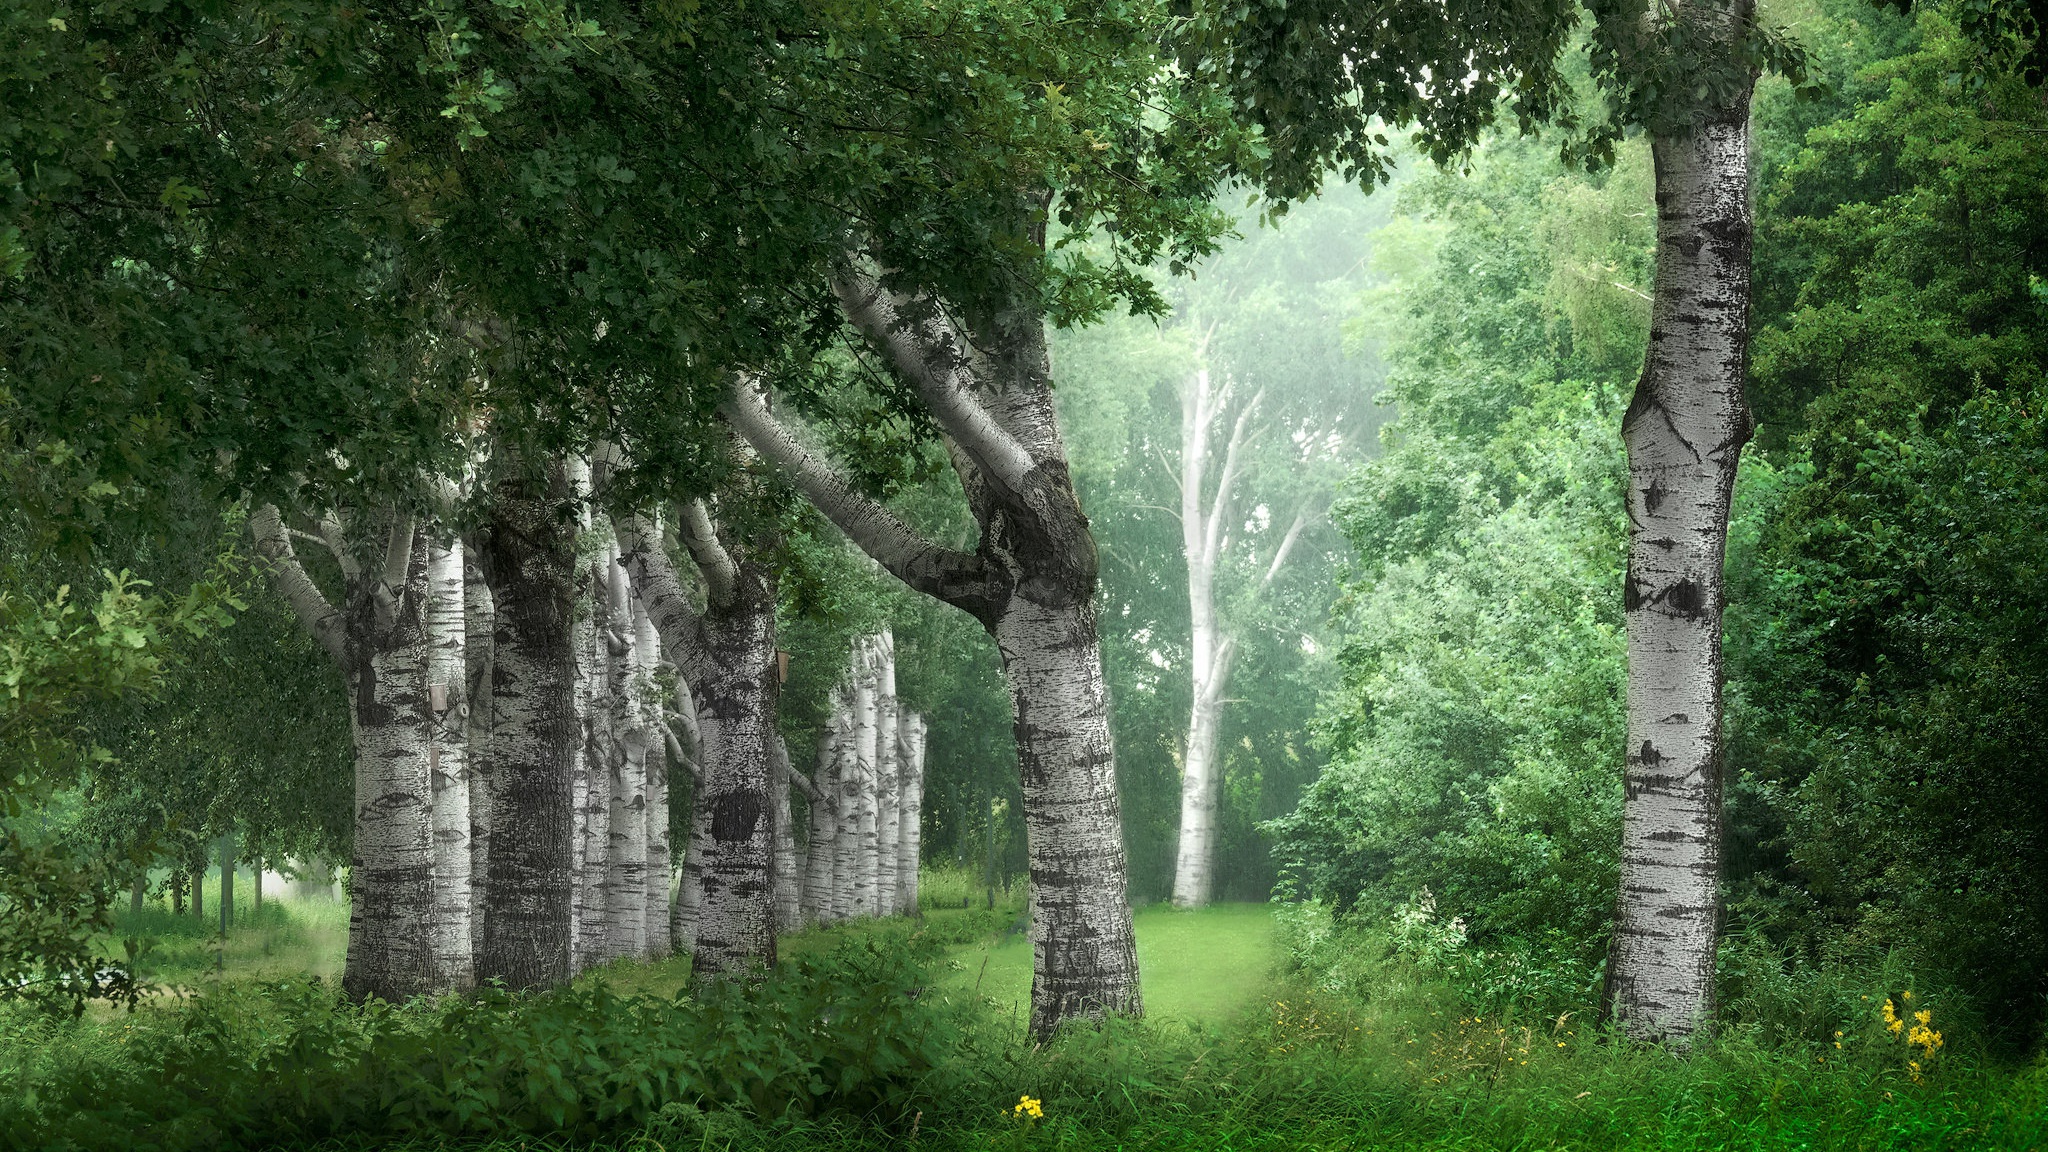 General 2048x1152 nature trees plants outdoors